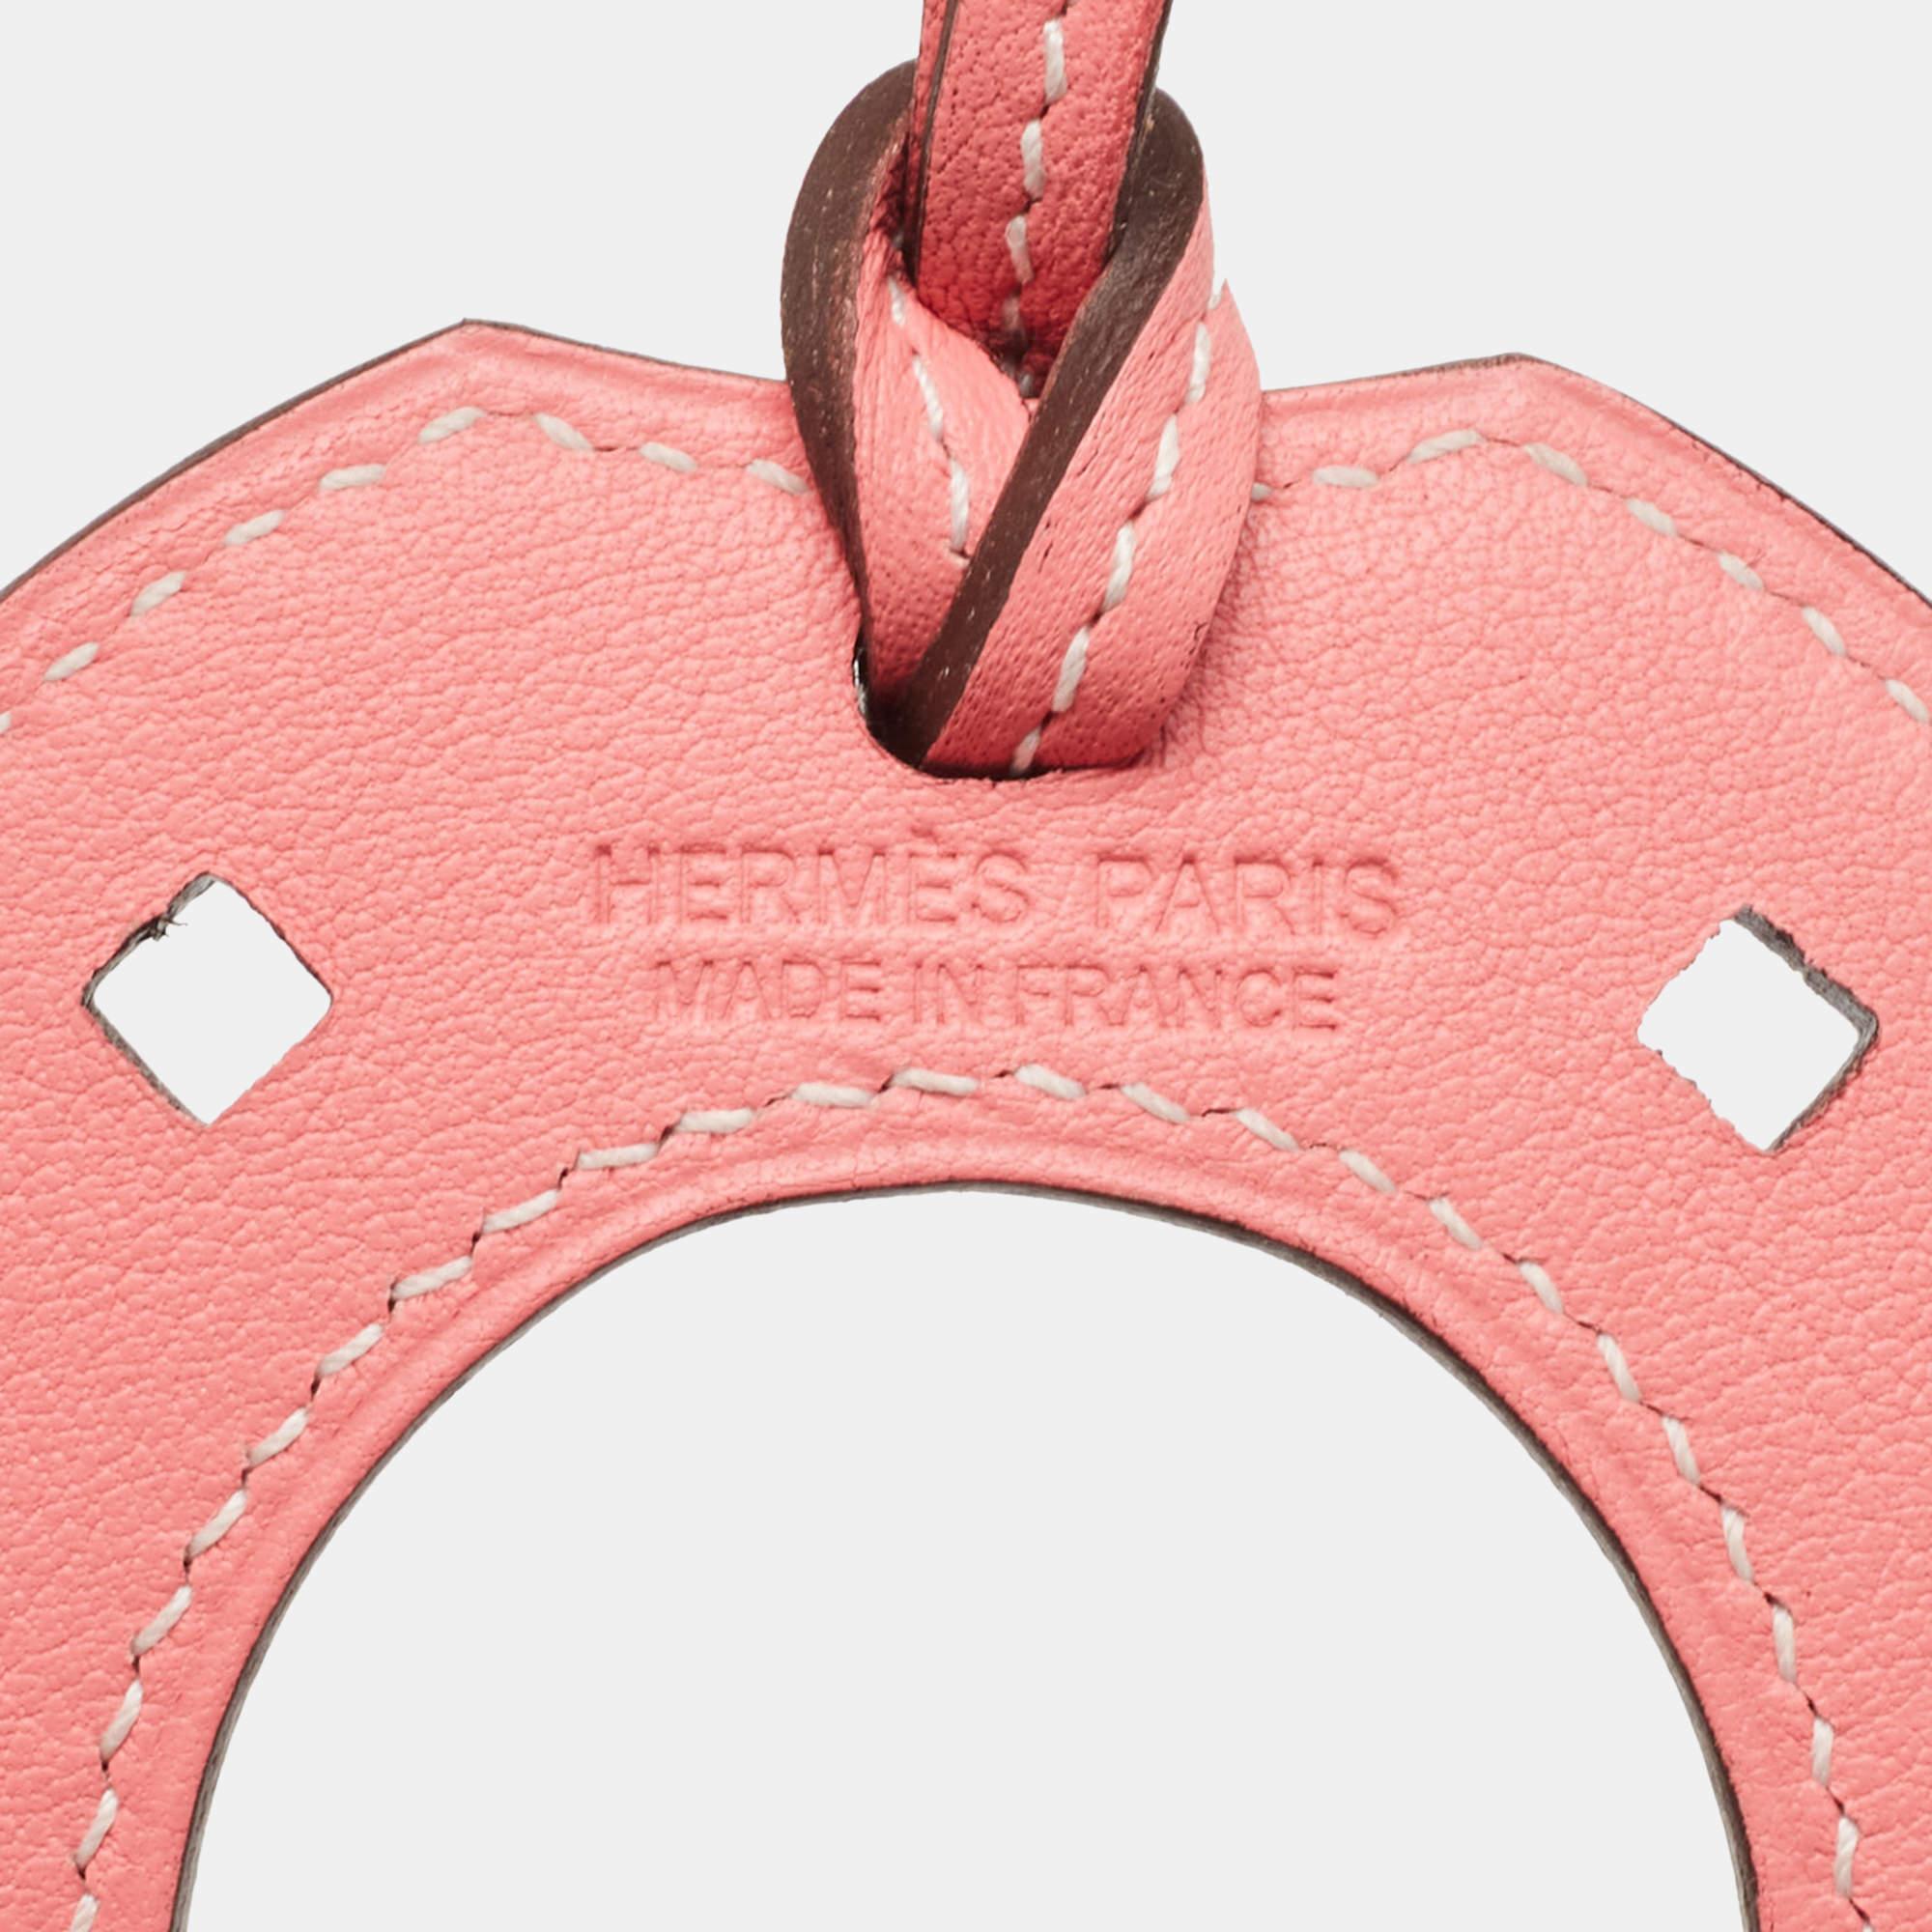 Paying homage to its equestrian heritage, this 'Paddock Fer a Cheval' bag charm from Hermès is a classy accessory to own. It is crafted using Swift leather and hangs from a strap. Needless to say, this Hermès bag charm will add a signature touch to